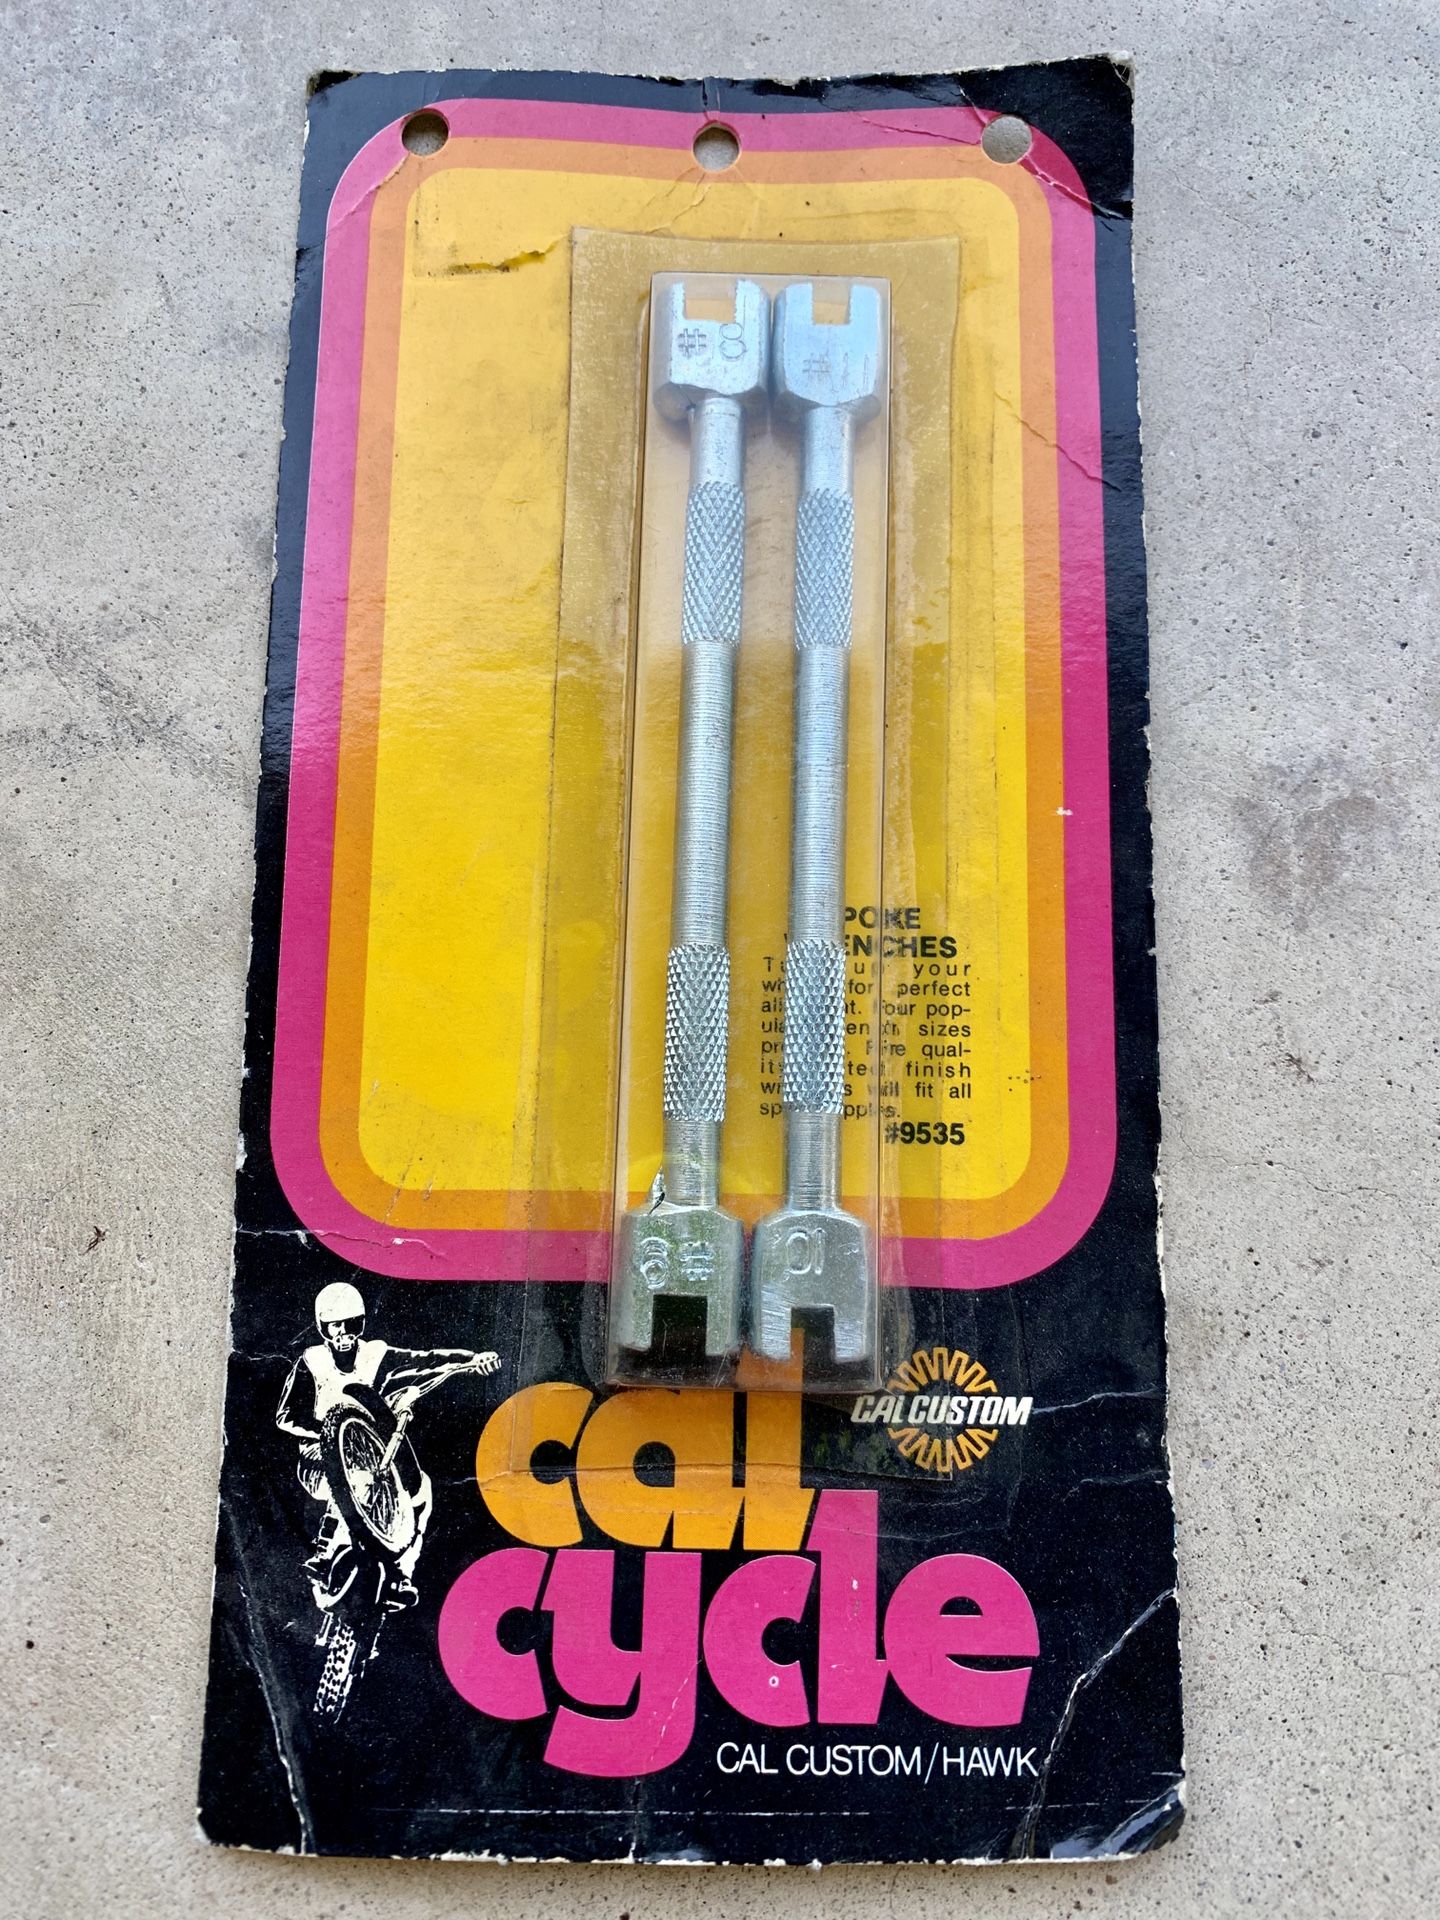 Vintage Cal Custom motorcycle Spoke Wrenches